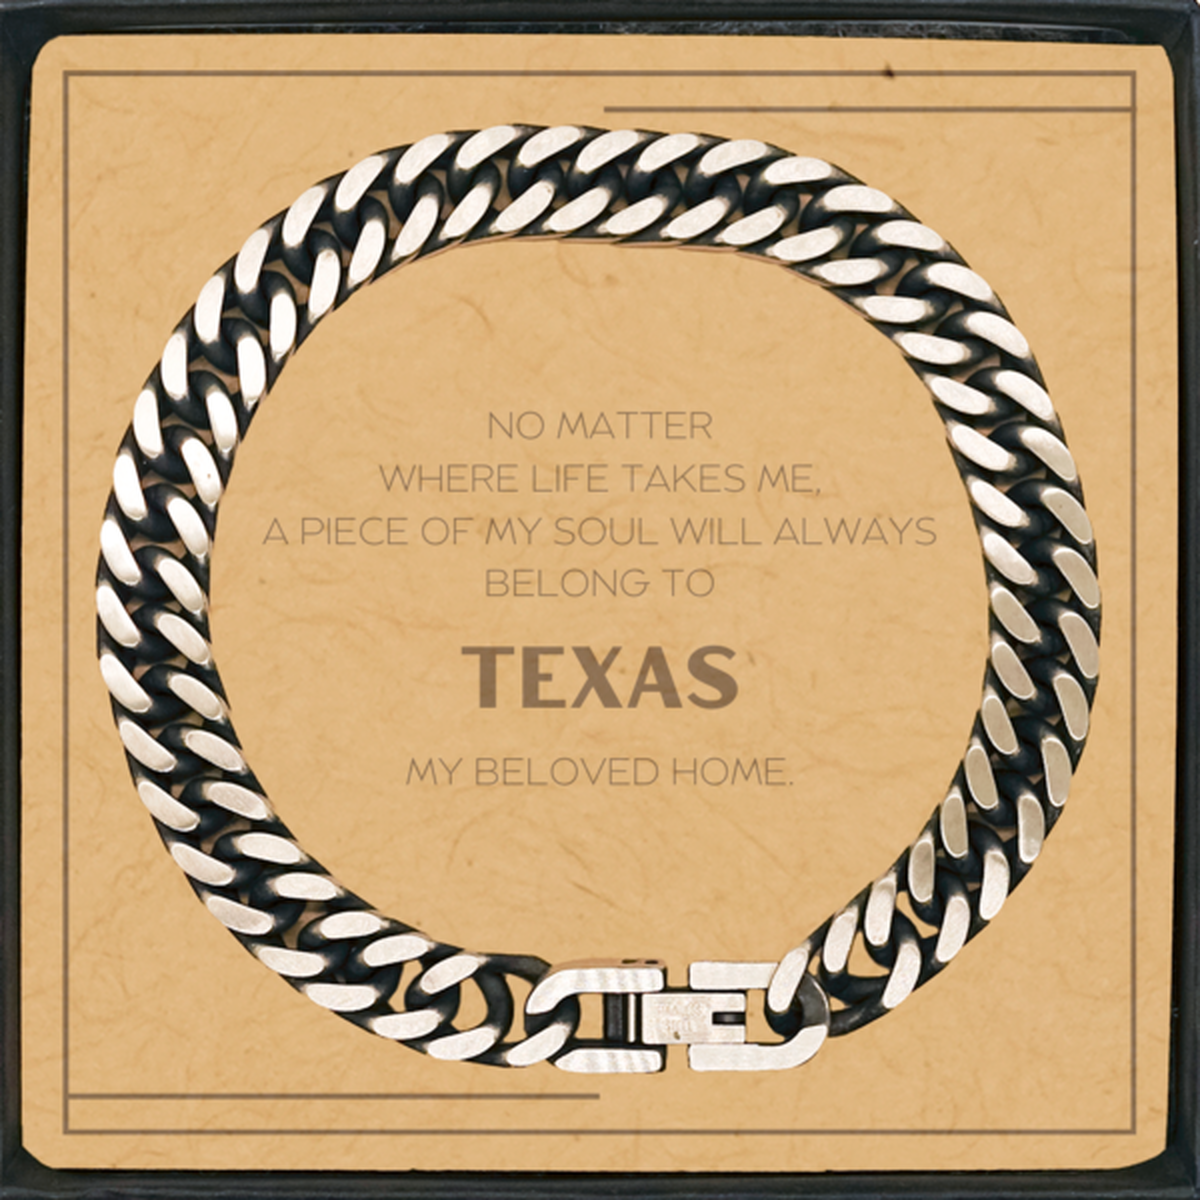 Love Texas State Gifts, My soul will always belong to Texas, Proud Cuban Link Chain Bracelet, Birthday Unique Gifts For Texas Men, Women, Friends